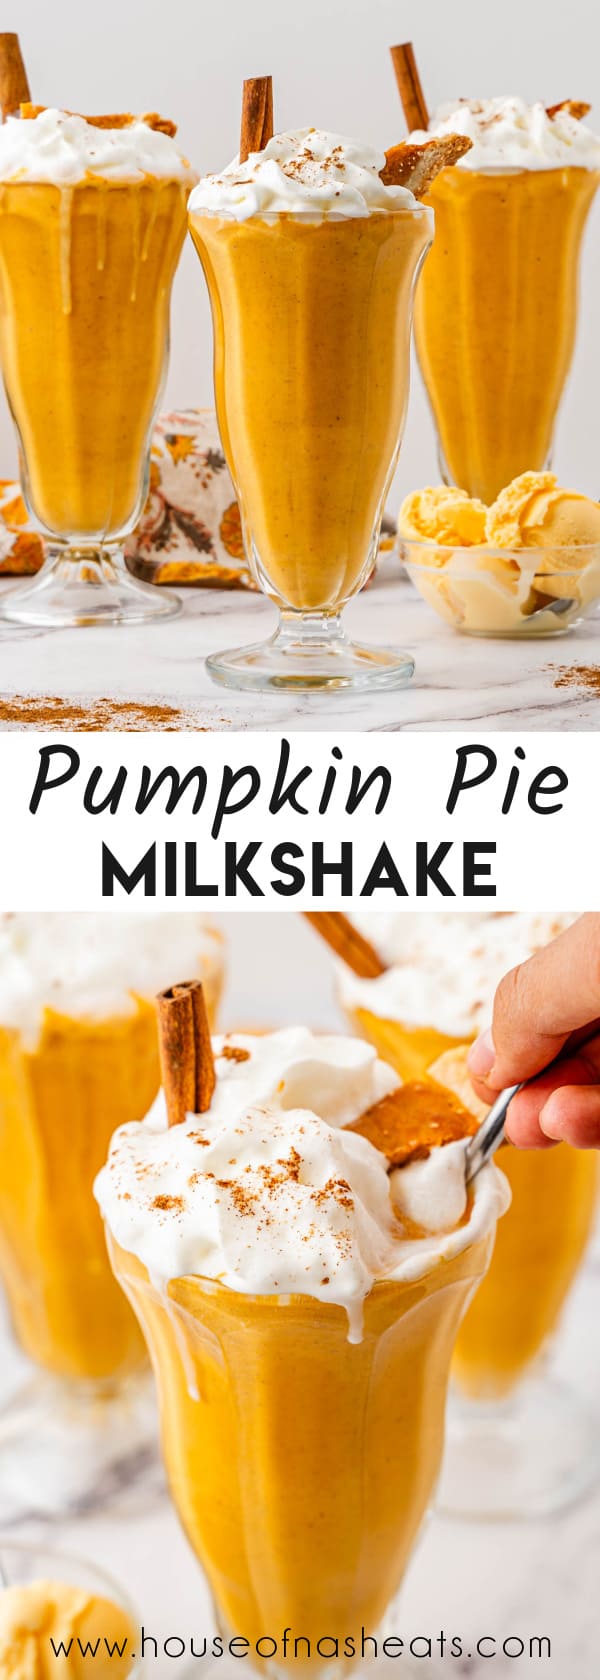 A collage of images of pumpkin pie milkshakes with text overlay.